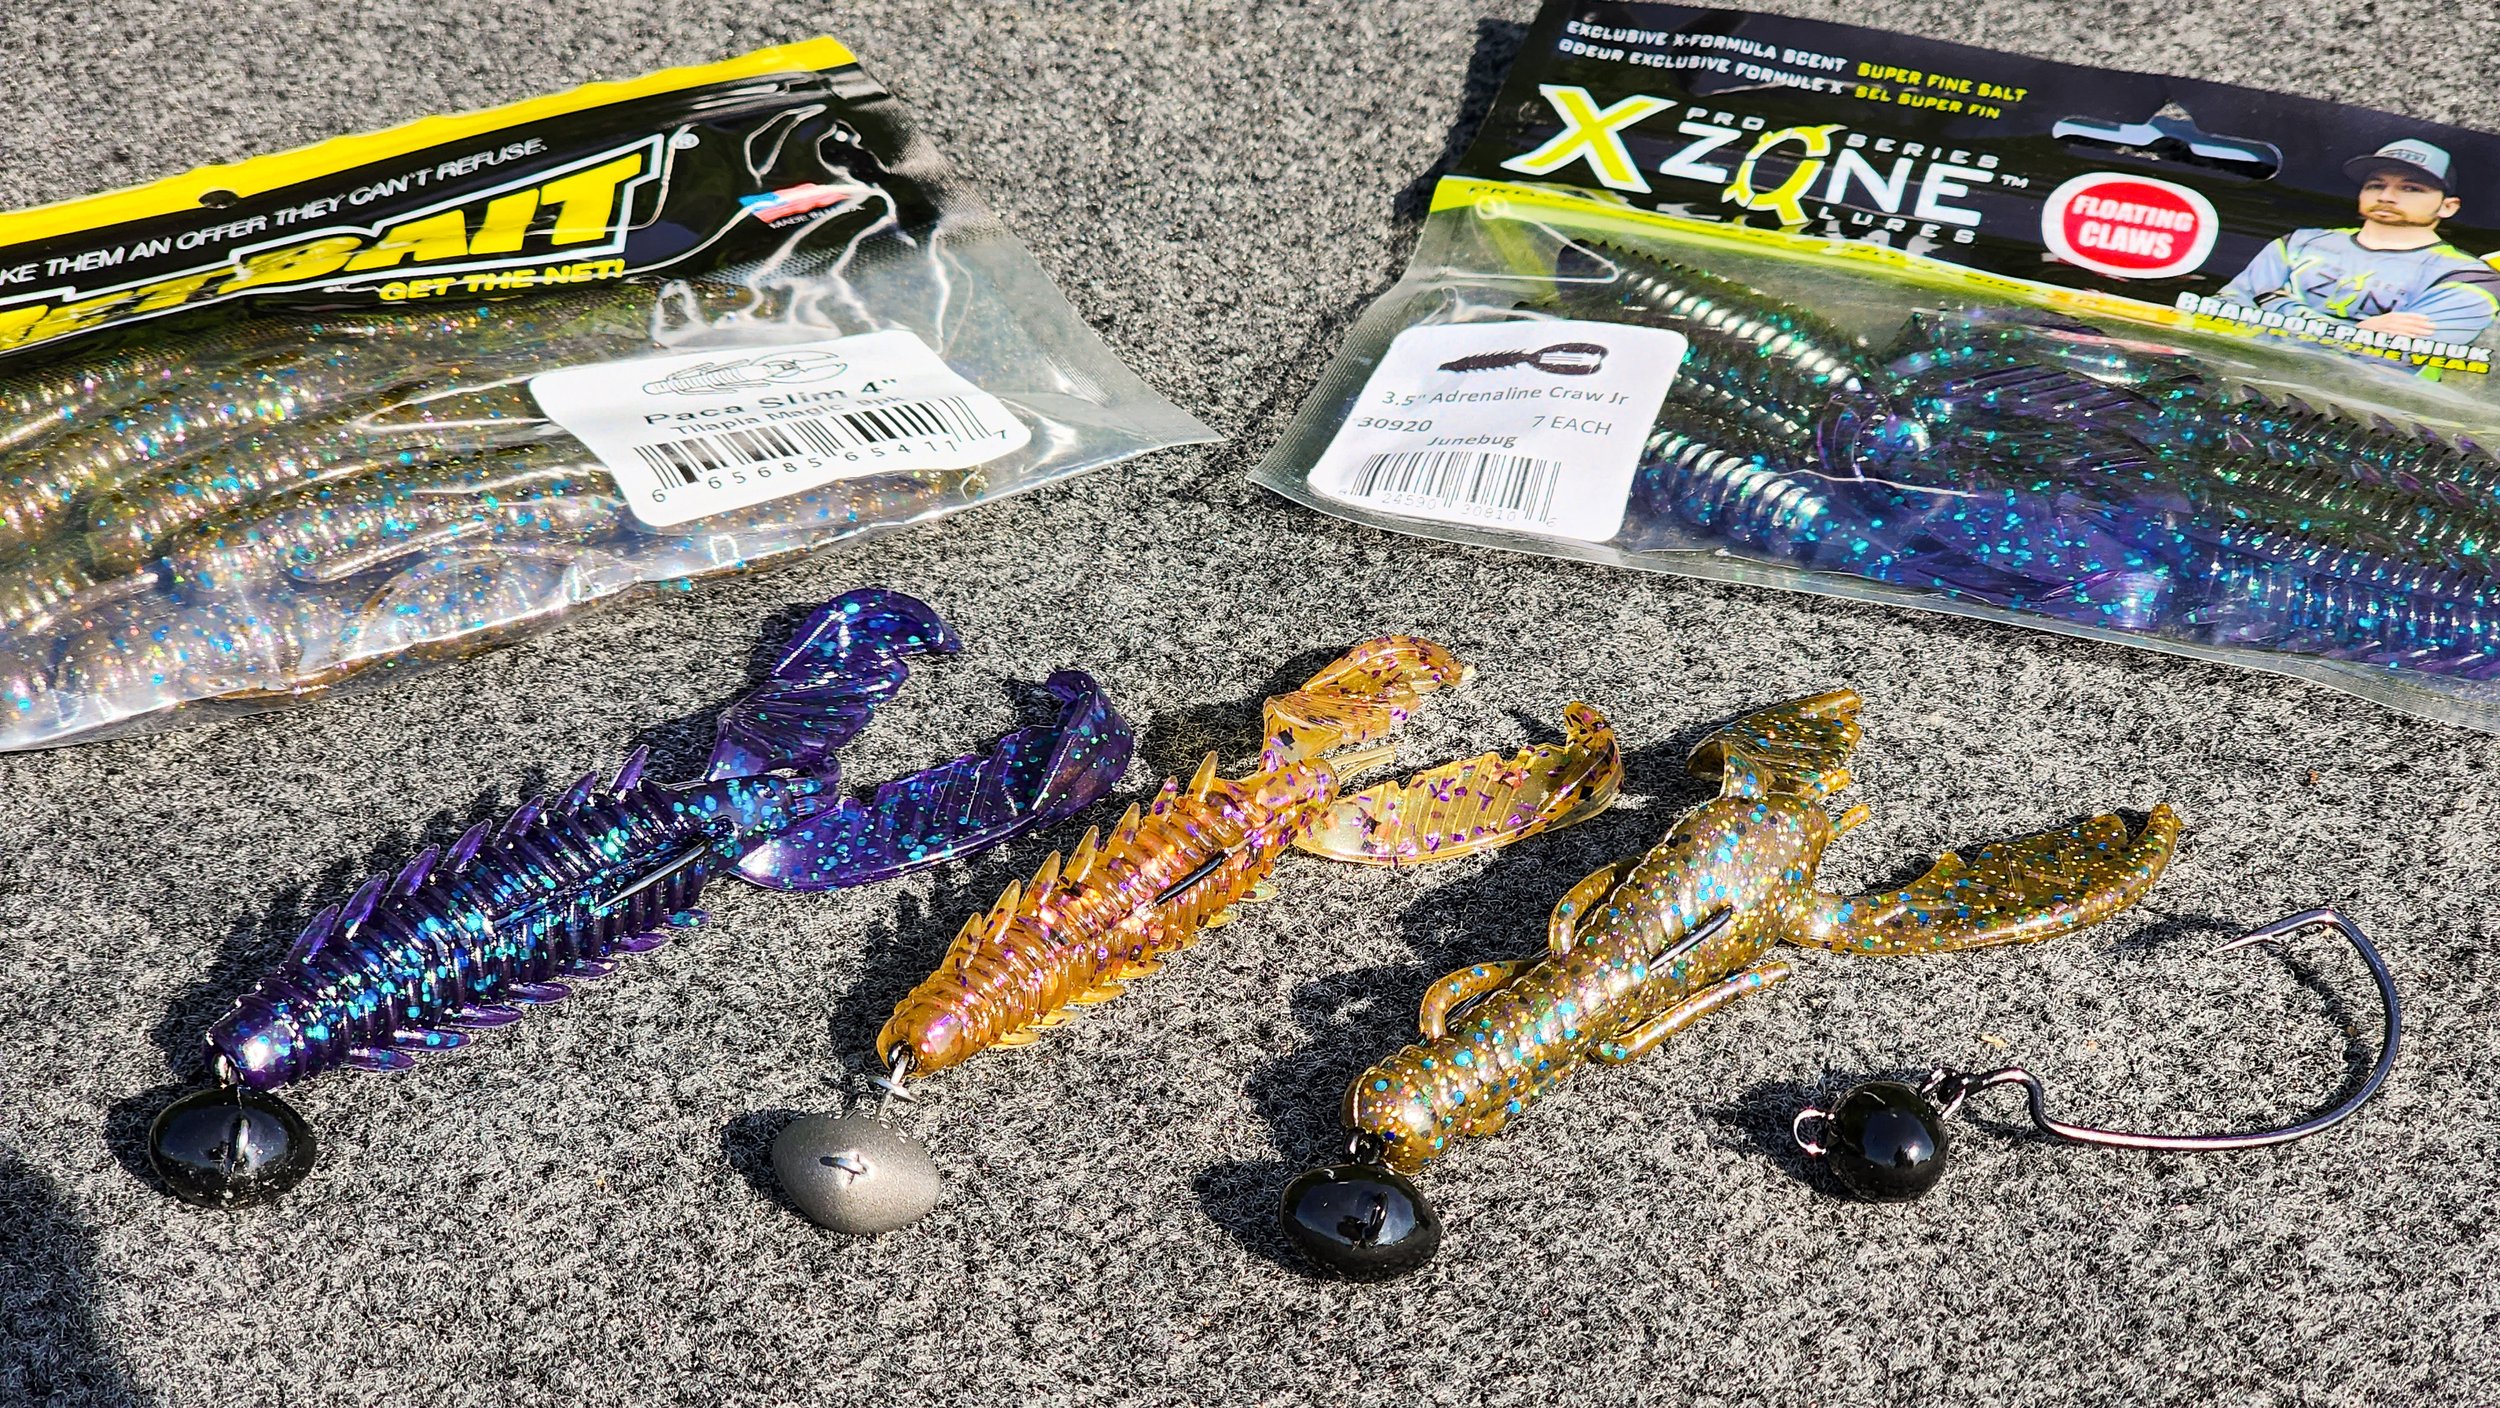 New Tungsten Wobble Head Jig pairs perfectly with the Adrenaline